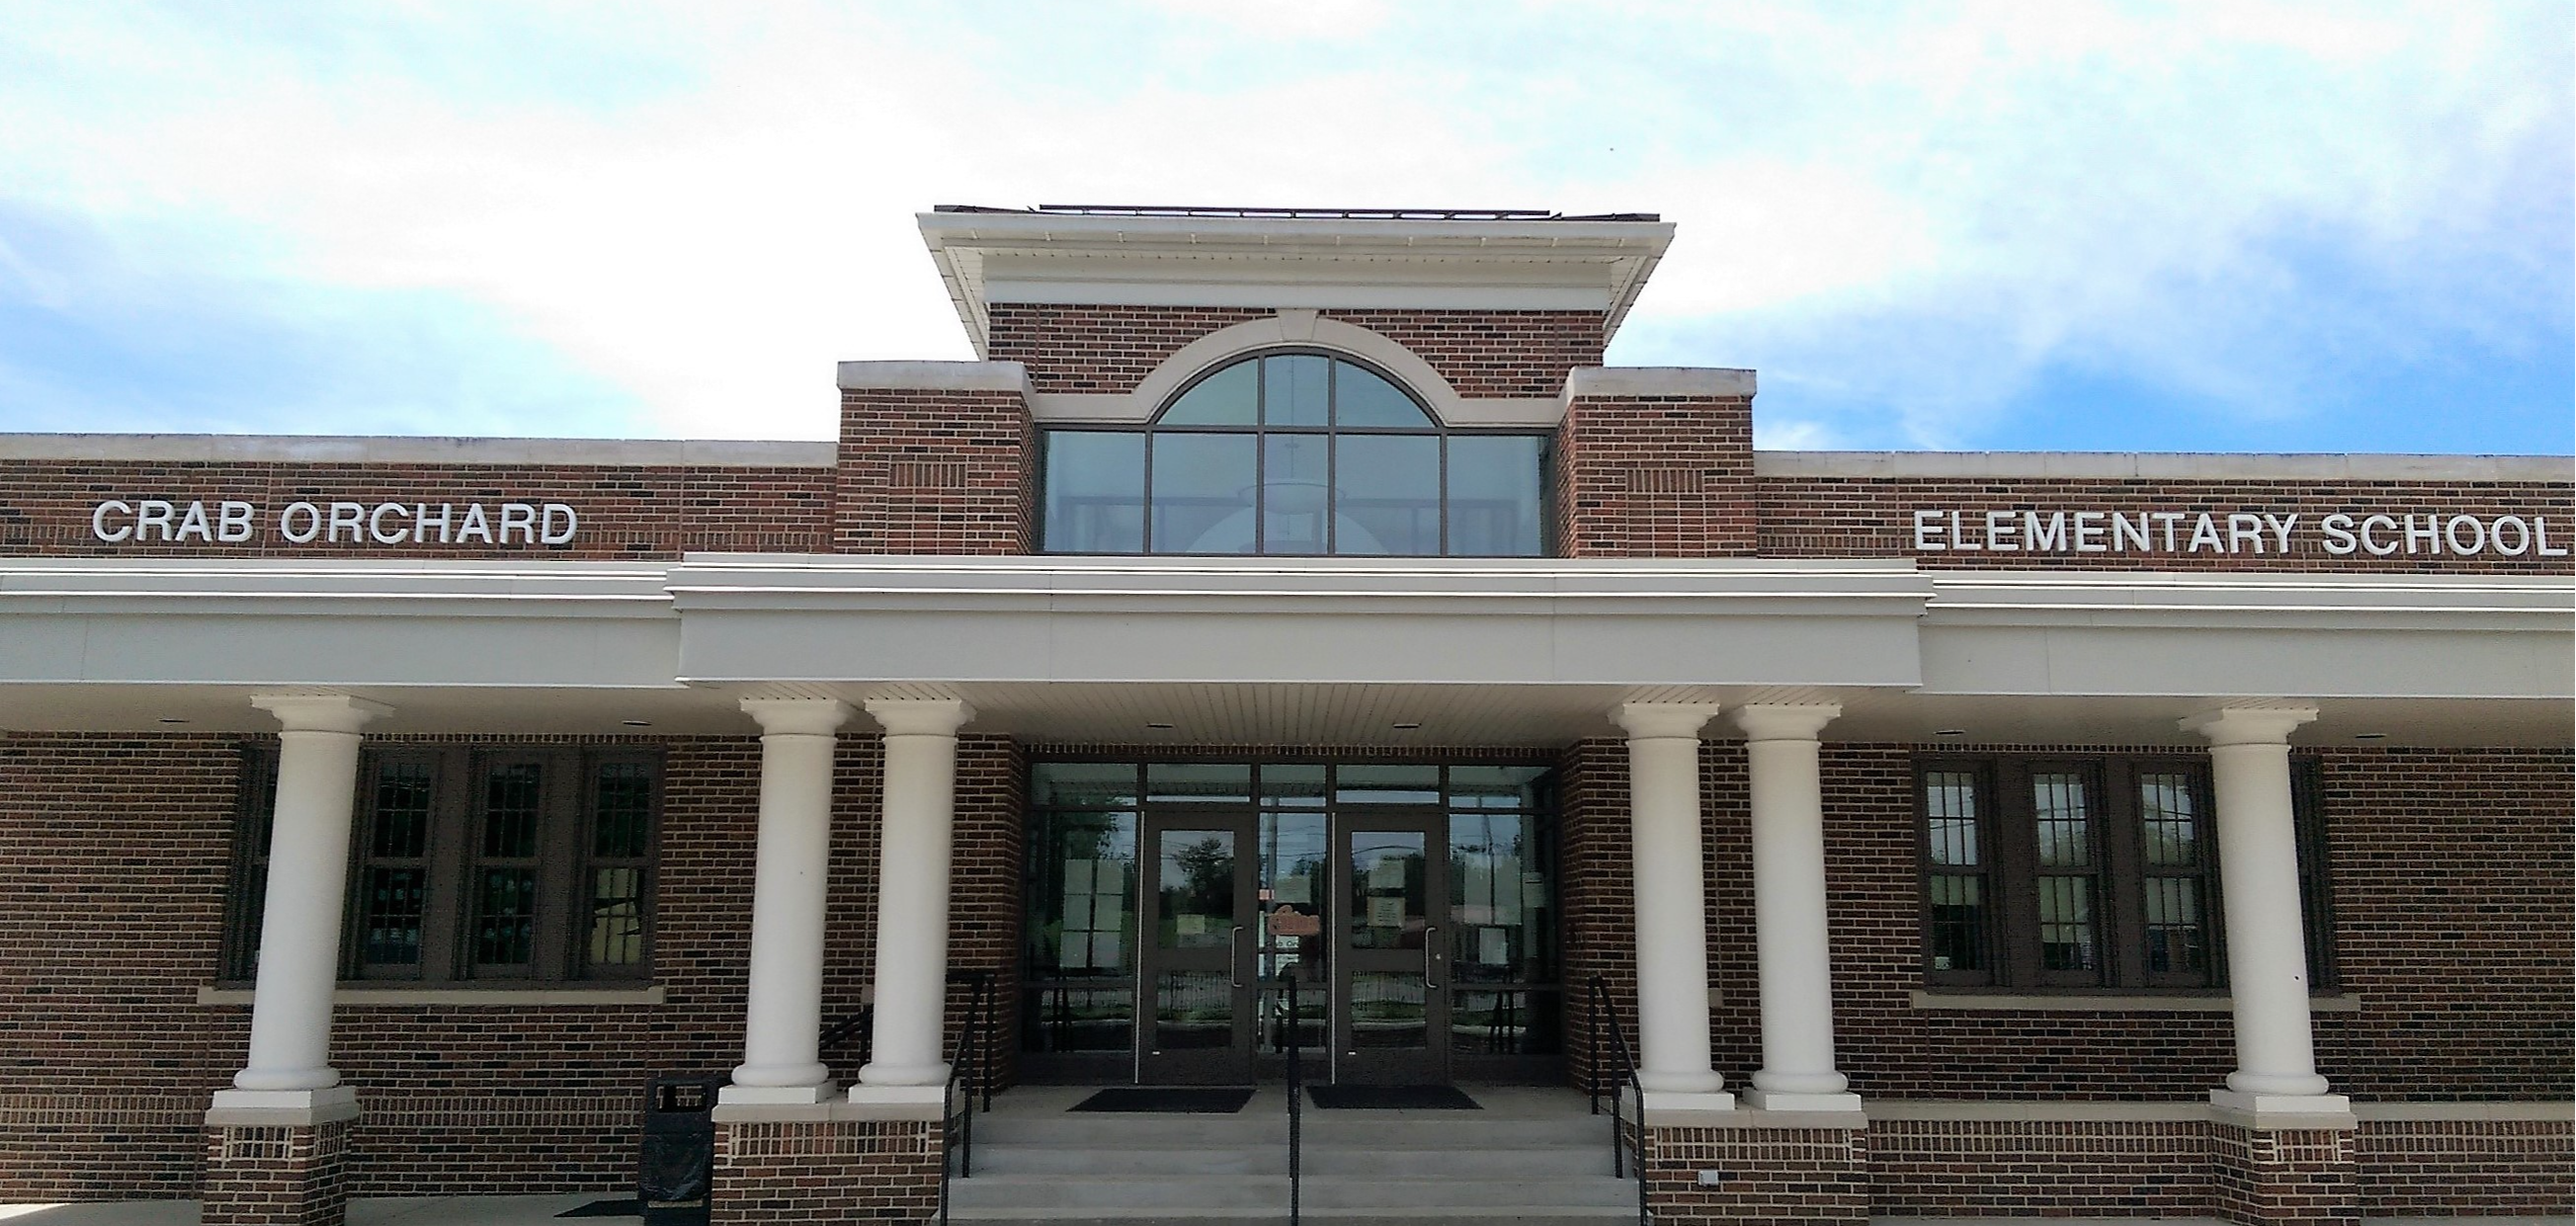 Crab Orchard Elementary School Building entrance